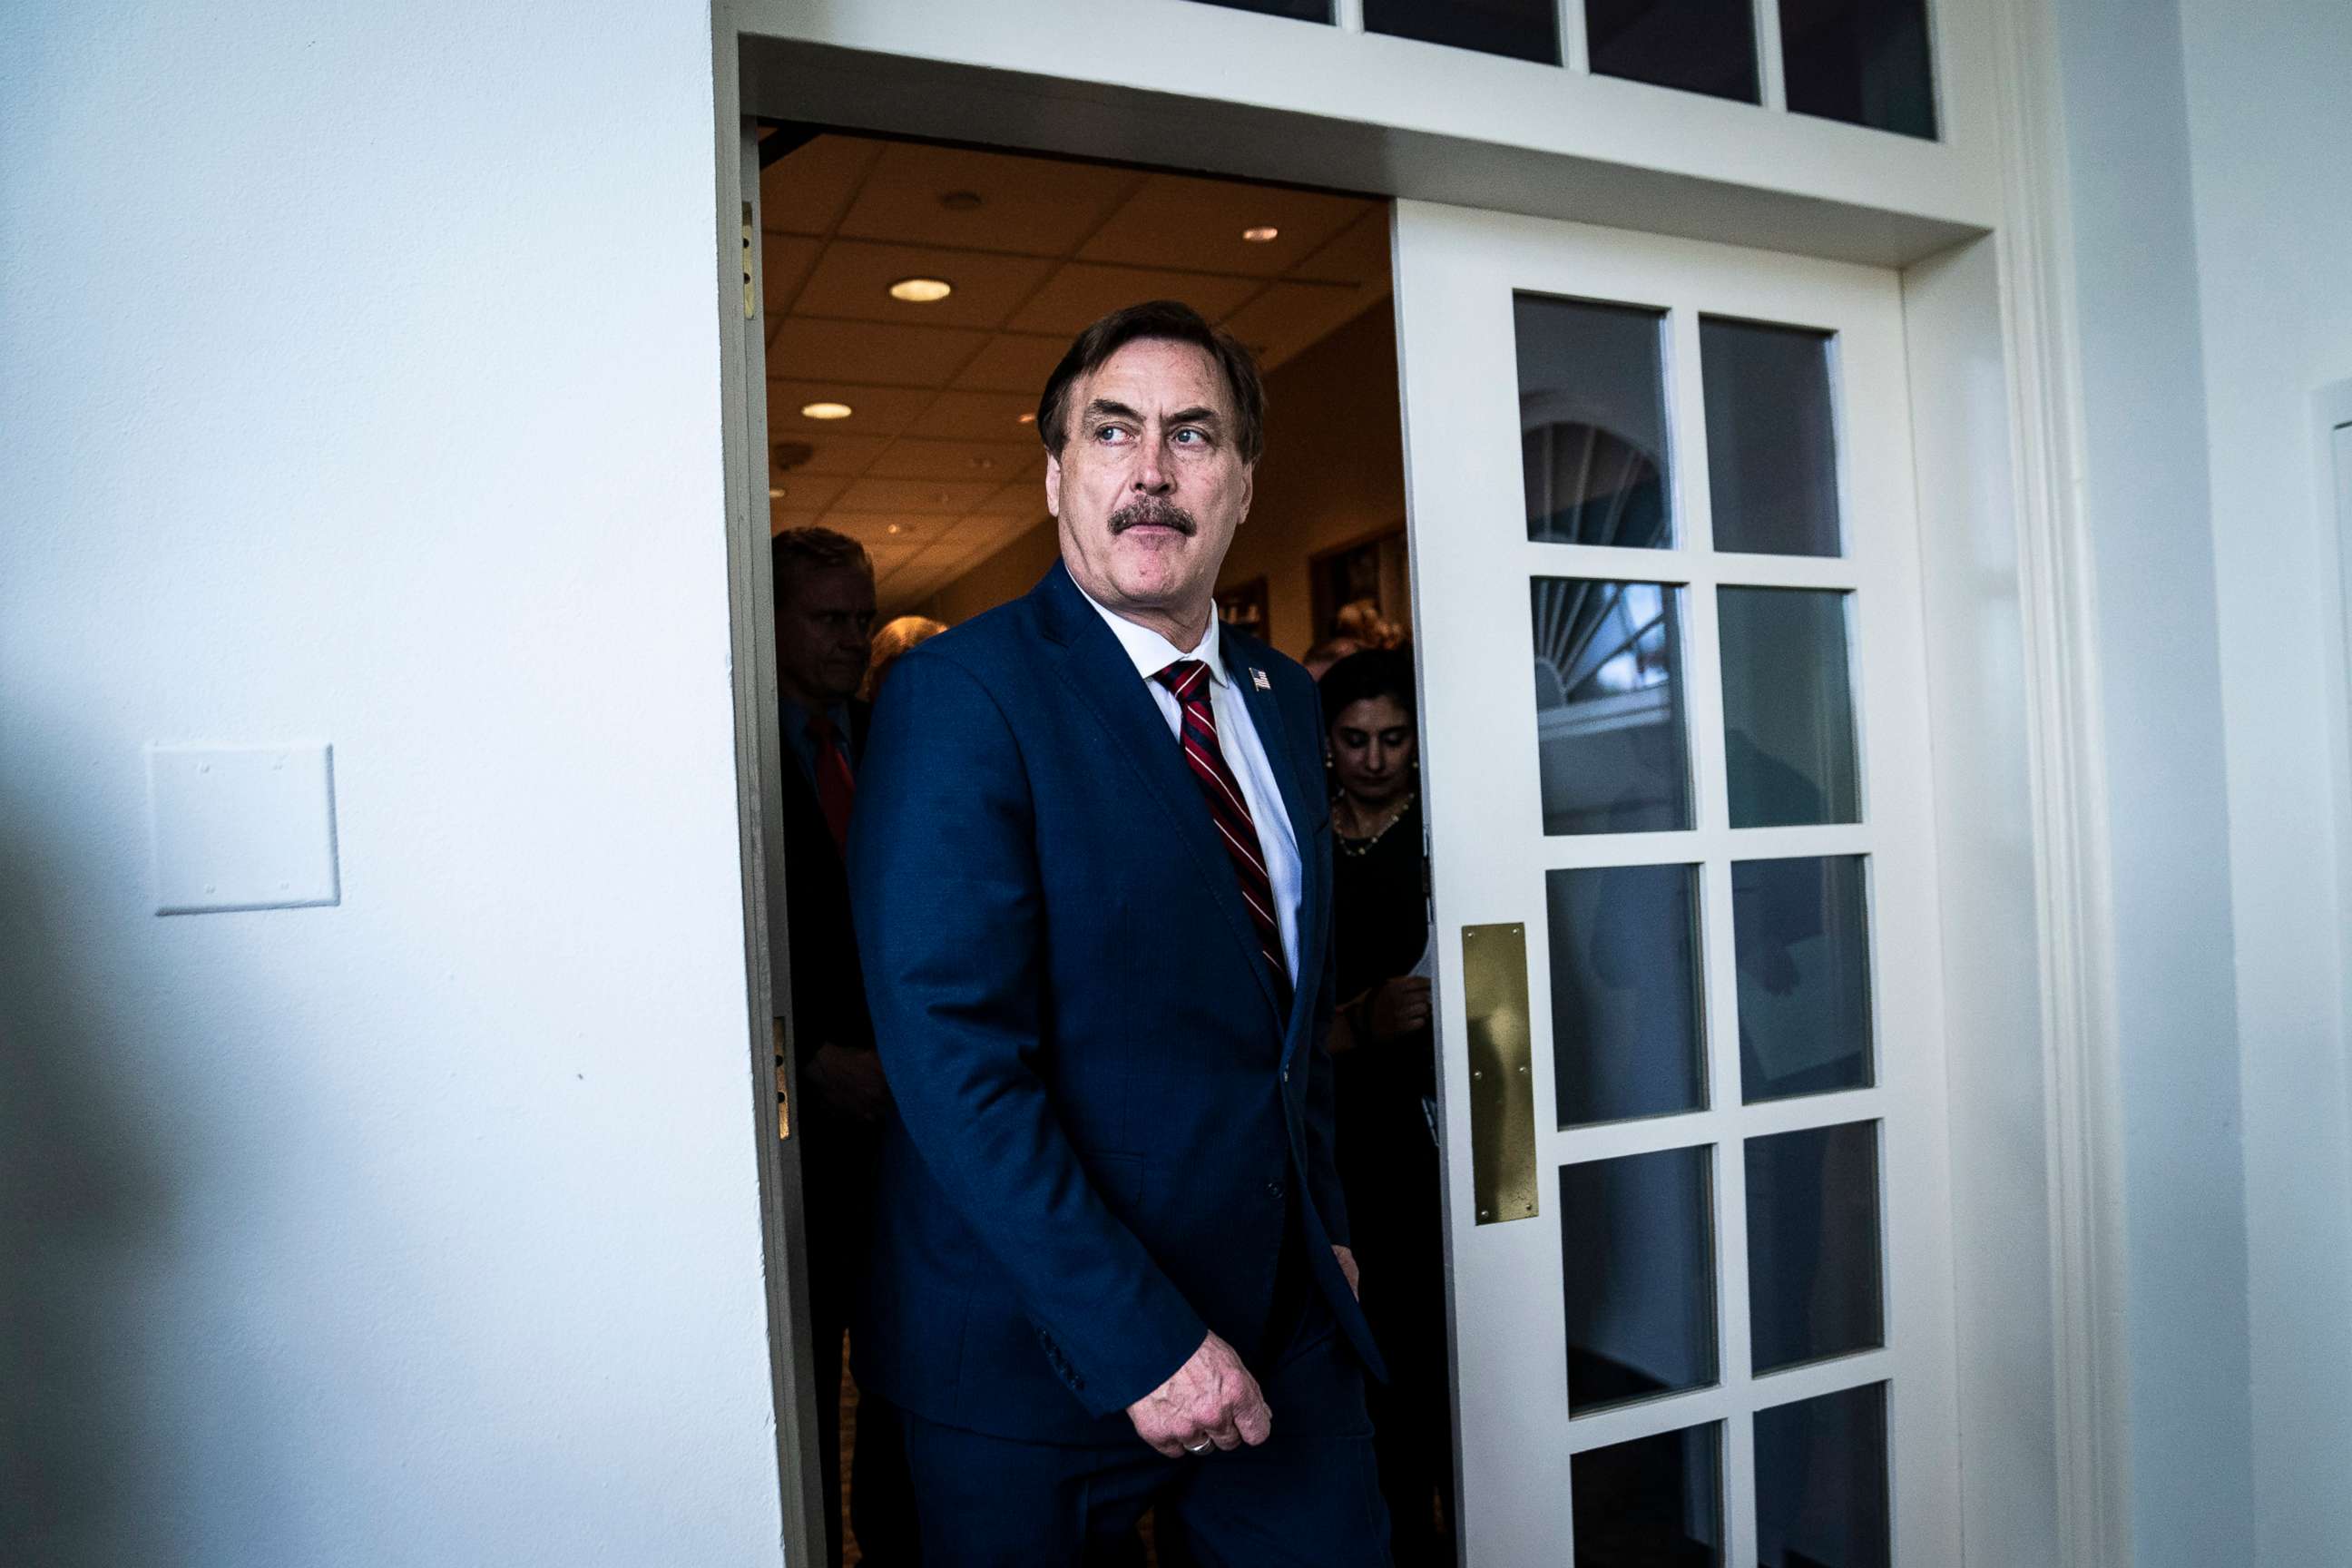 PHOTO: My Pillow CEO Mike Lindell walks out walks out of the White House ahead of a press conference with President Trump, March 30, 2020, in Washington, D.C.